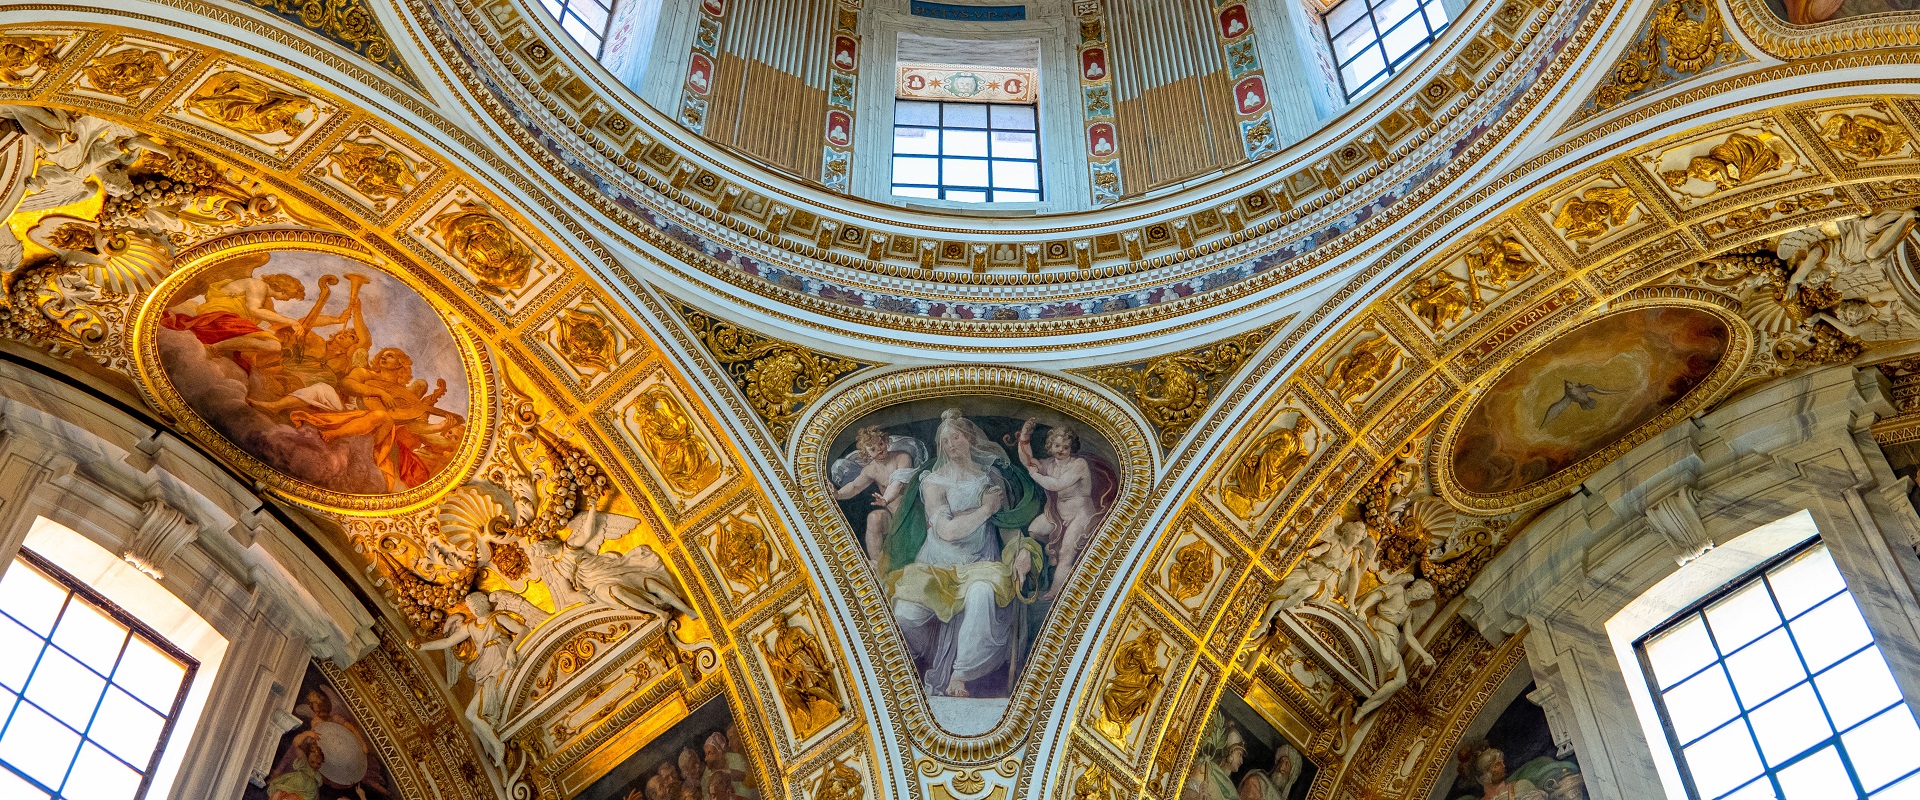 The vault and dome over the Sistine Chapel. Image: Getty